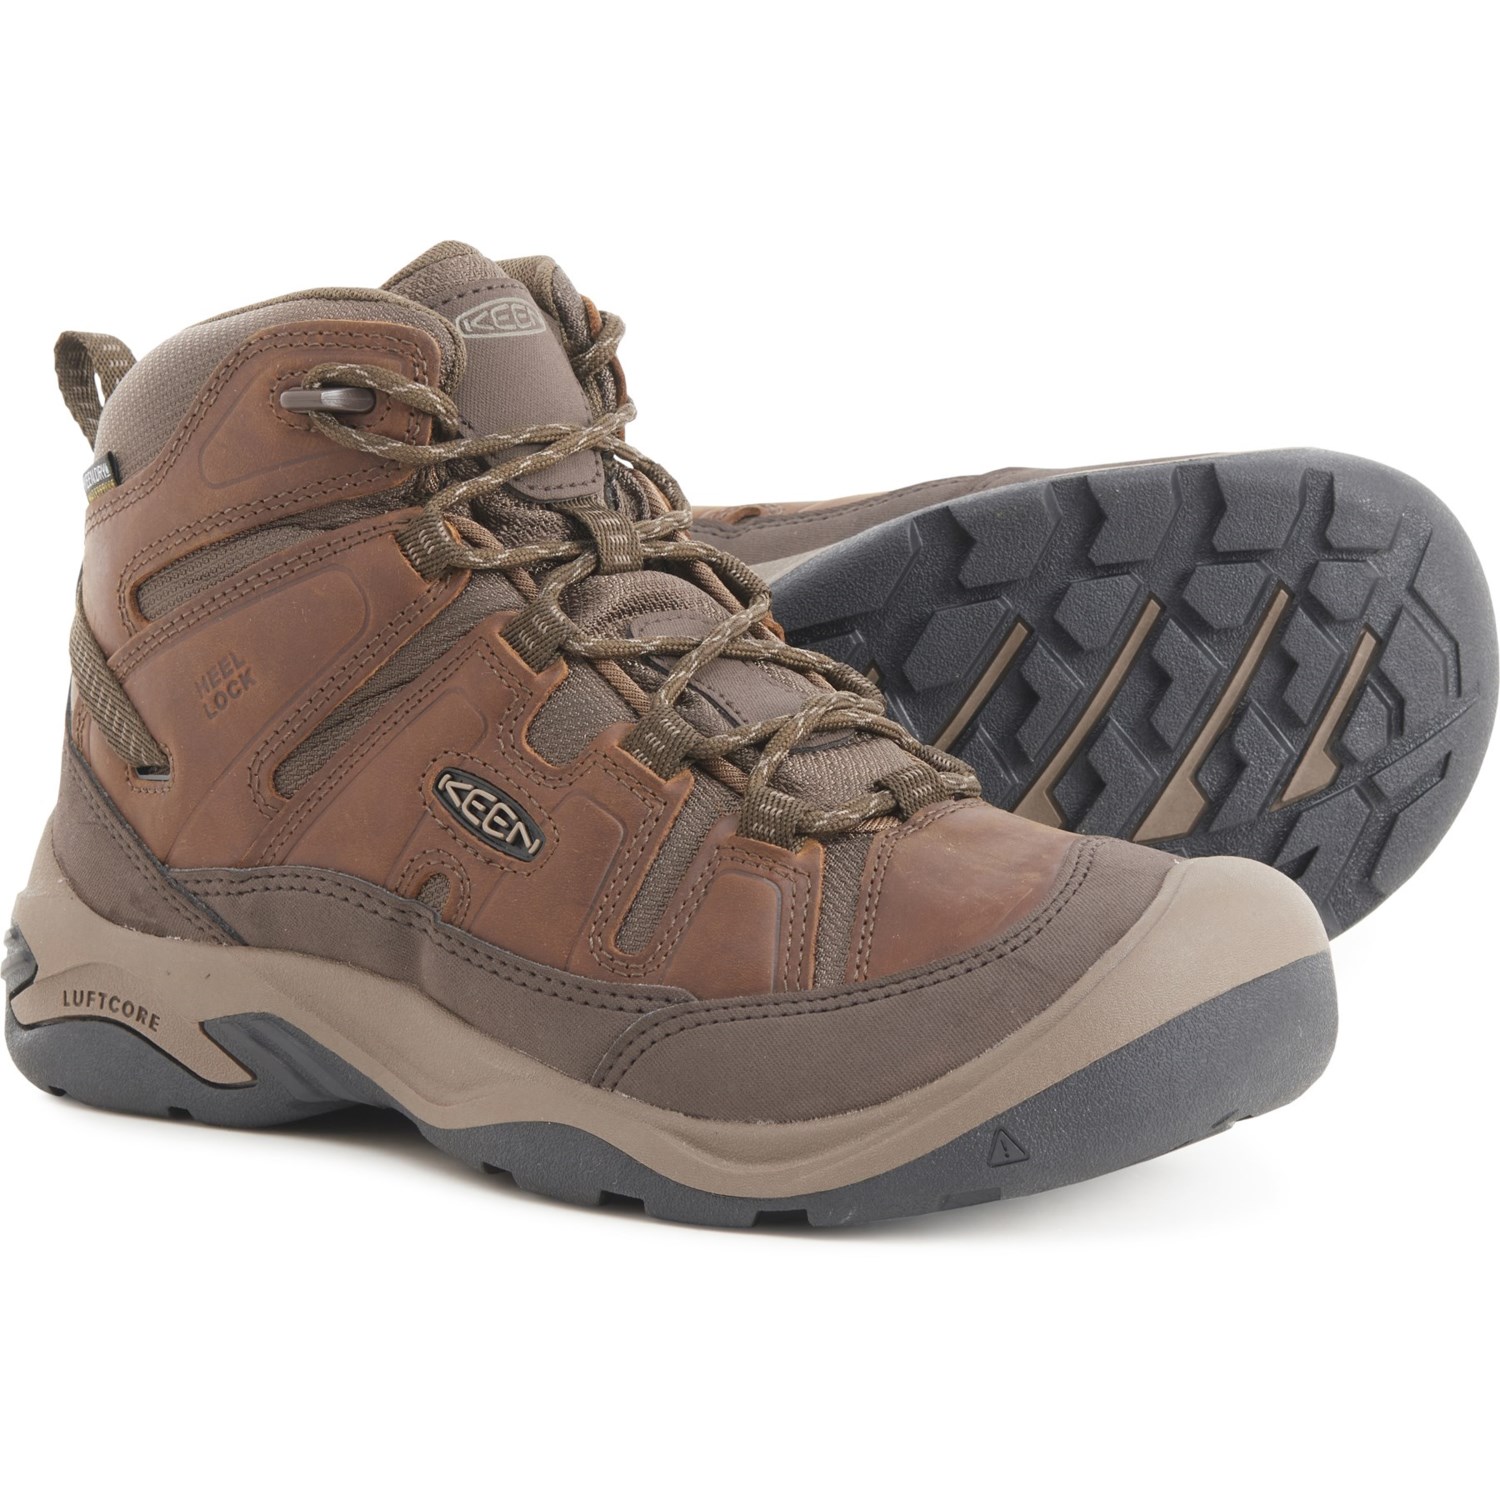 Keen Circadia Mid Hiking Boots - Waterproof, Leather (For Men)